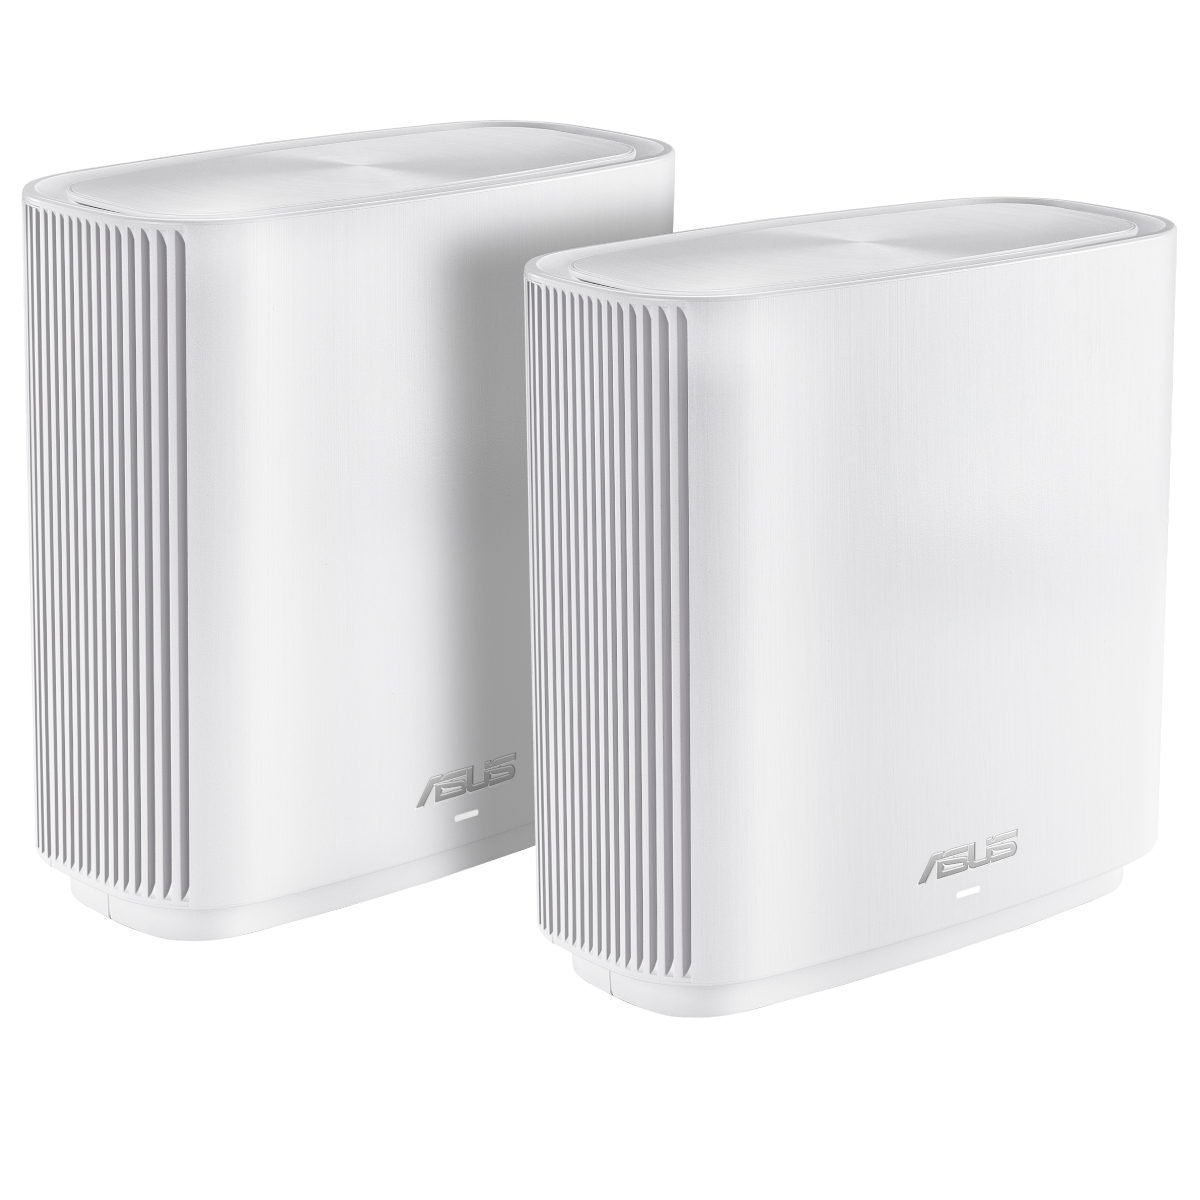 Asus - ASUS ZenWifi AC (CT8) AC3000 WiFi 5 Mesh System Pack of 2 - White